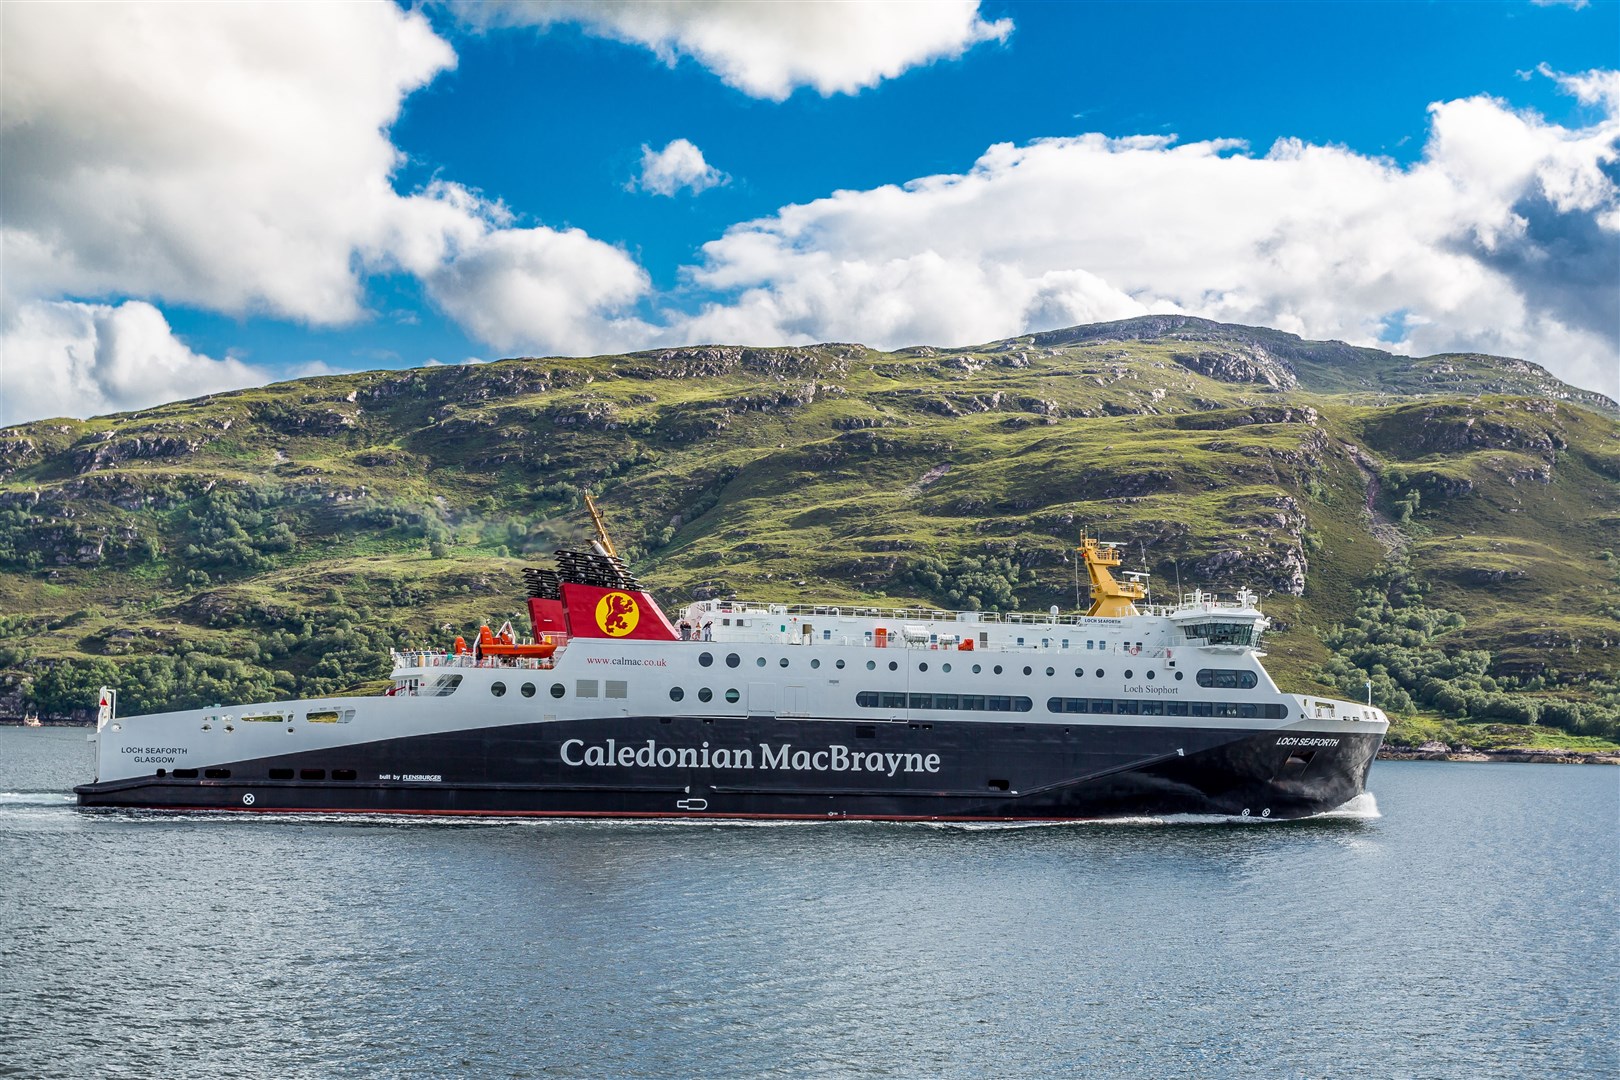 Some 15 of CalMac's ferries are now beyond their projected 25 year operational life.